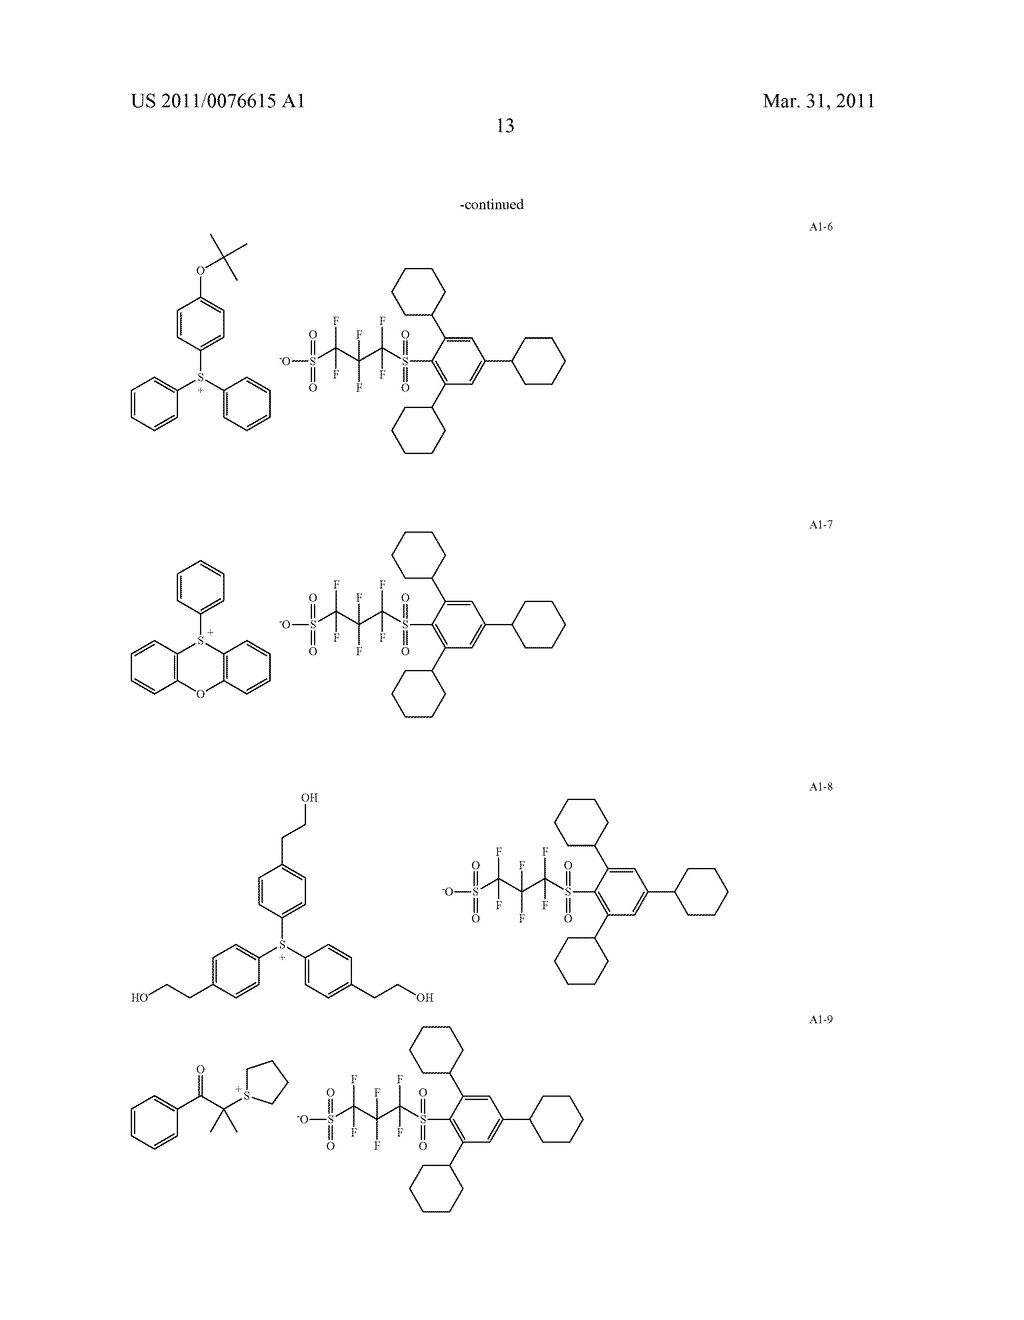 ACTINIC-RAY- OR RADIATION-SENSITIVE RESIN COMPOSITION AND METHOD OF FORMING PATTERN USING THE COMPOSITION - diagram, schematic, and image 14